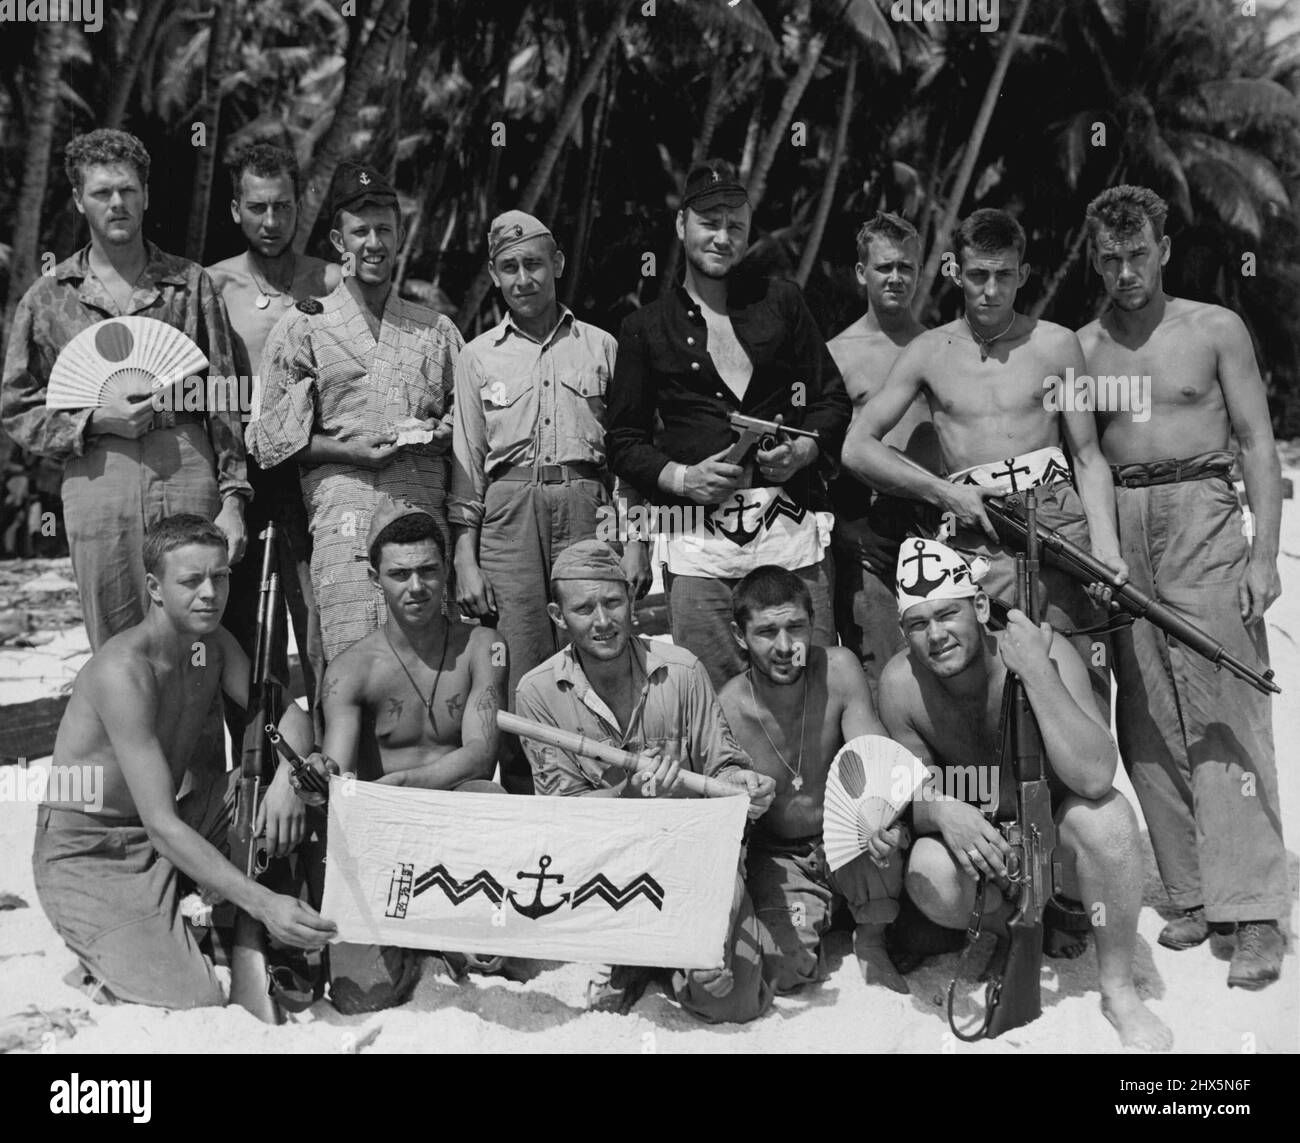 Marines With Pacific Battle Trophies -- After having cleared Tarawa of the enemy, these Marines wear and display some of the Japanese trophies they picked up in battle. This group went to Apamama after Tarawa. Left to right (standing); PFC Robert M. Phillips, Milwaukee, Wis.; Cpl. Raymond W. Boese, Bloomer, Wis.; PFC Herman Kaufman Chicago, Ill.; Lieut. J. B. McPeters, Killen, Ala.; Sgt. Stanley V. Grooms, Everett, Mass.; PFC Peter A. Olson, Berkeley, Calif.; Pvt. Alvin G. Shulz, Lake Mills, Wis.; and Cpl. Charles F. Wolfe, Ada, Ohio. Seated: PFC Donald R. Nielson, Neenah, Wis.; Pvt. Oscar J. Stock Photo